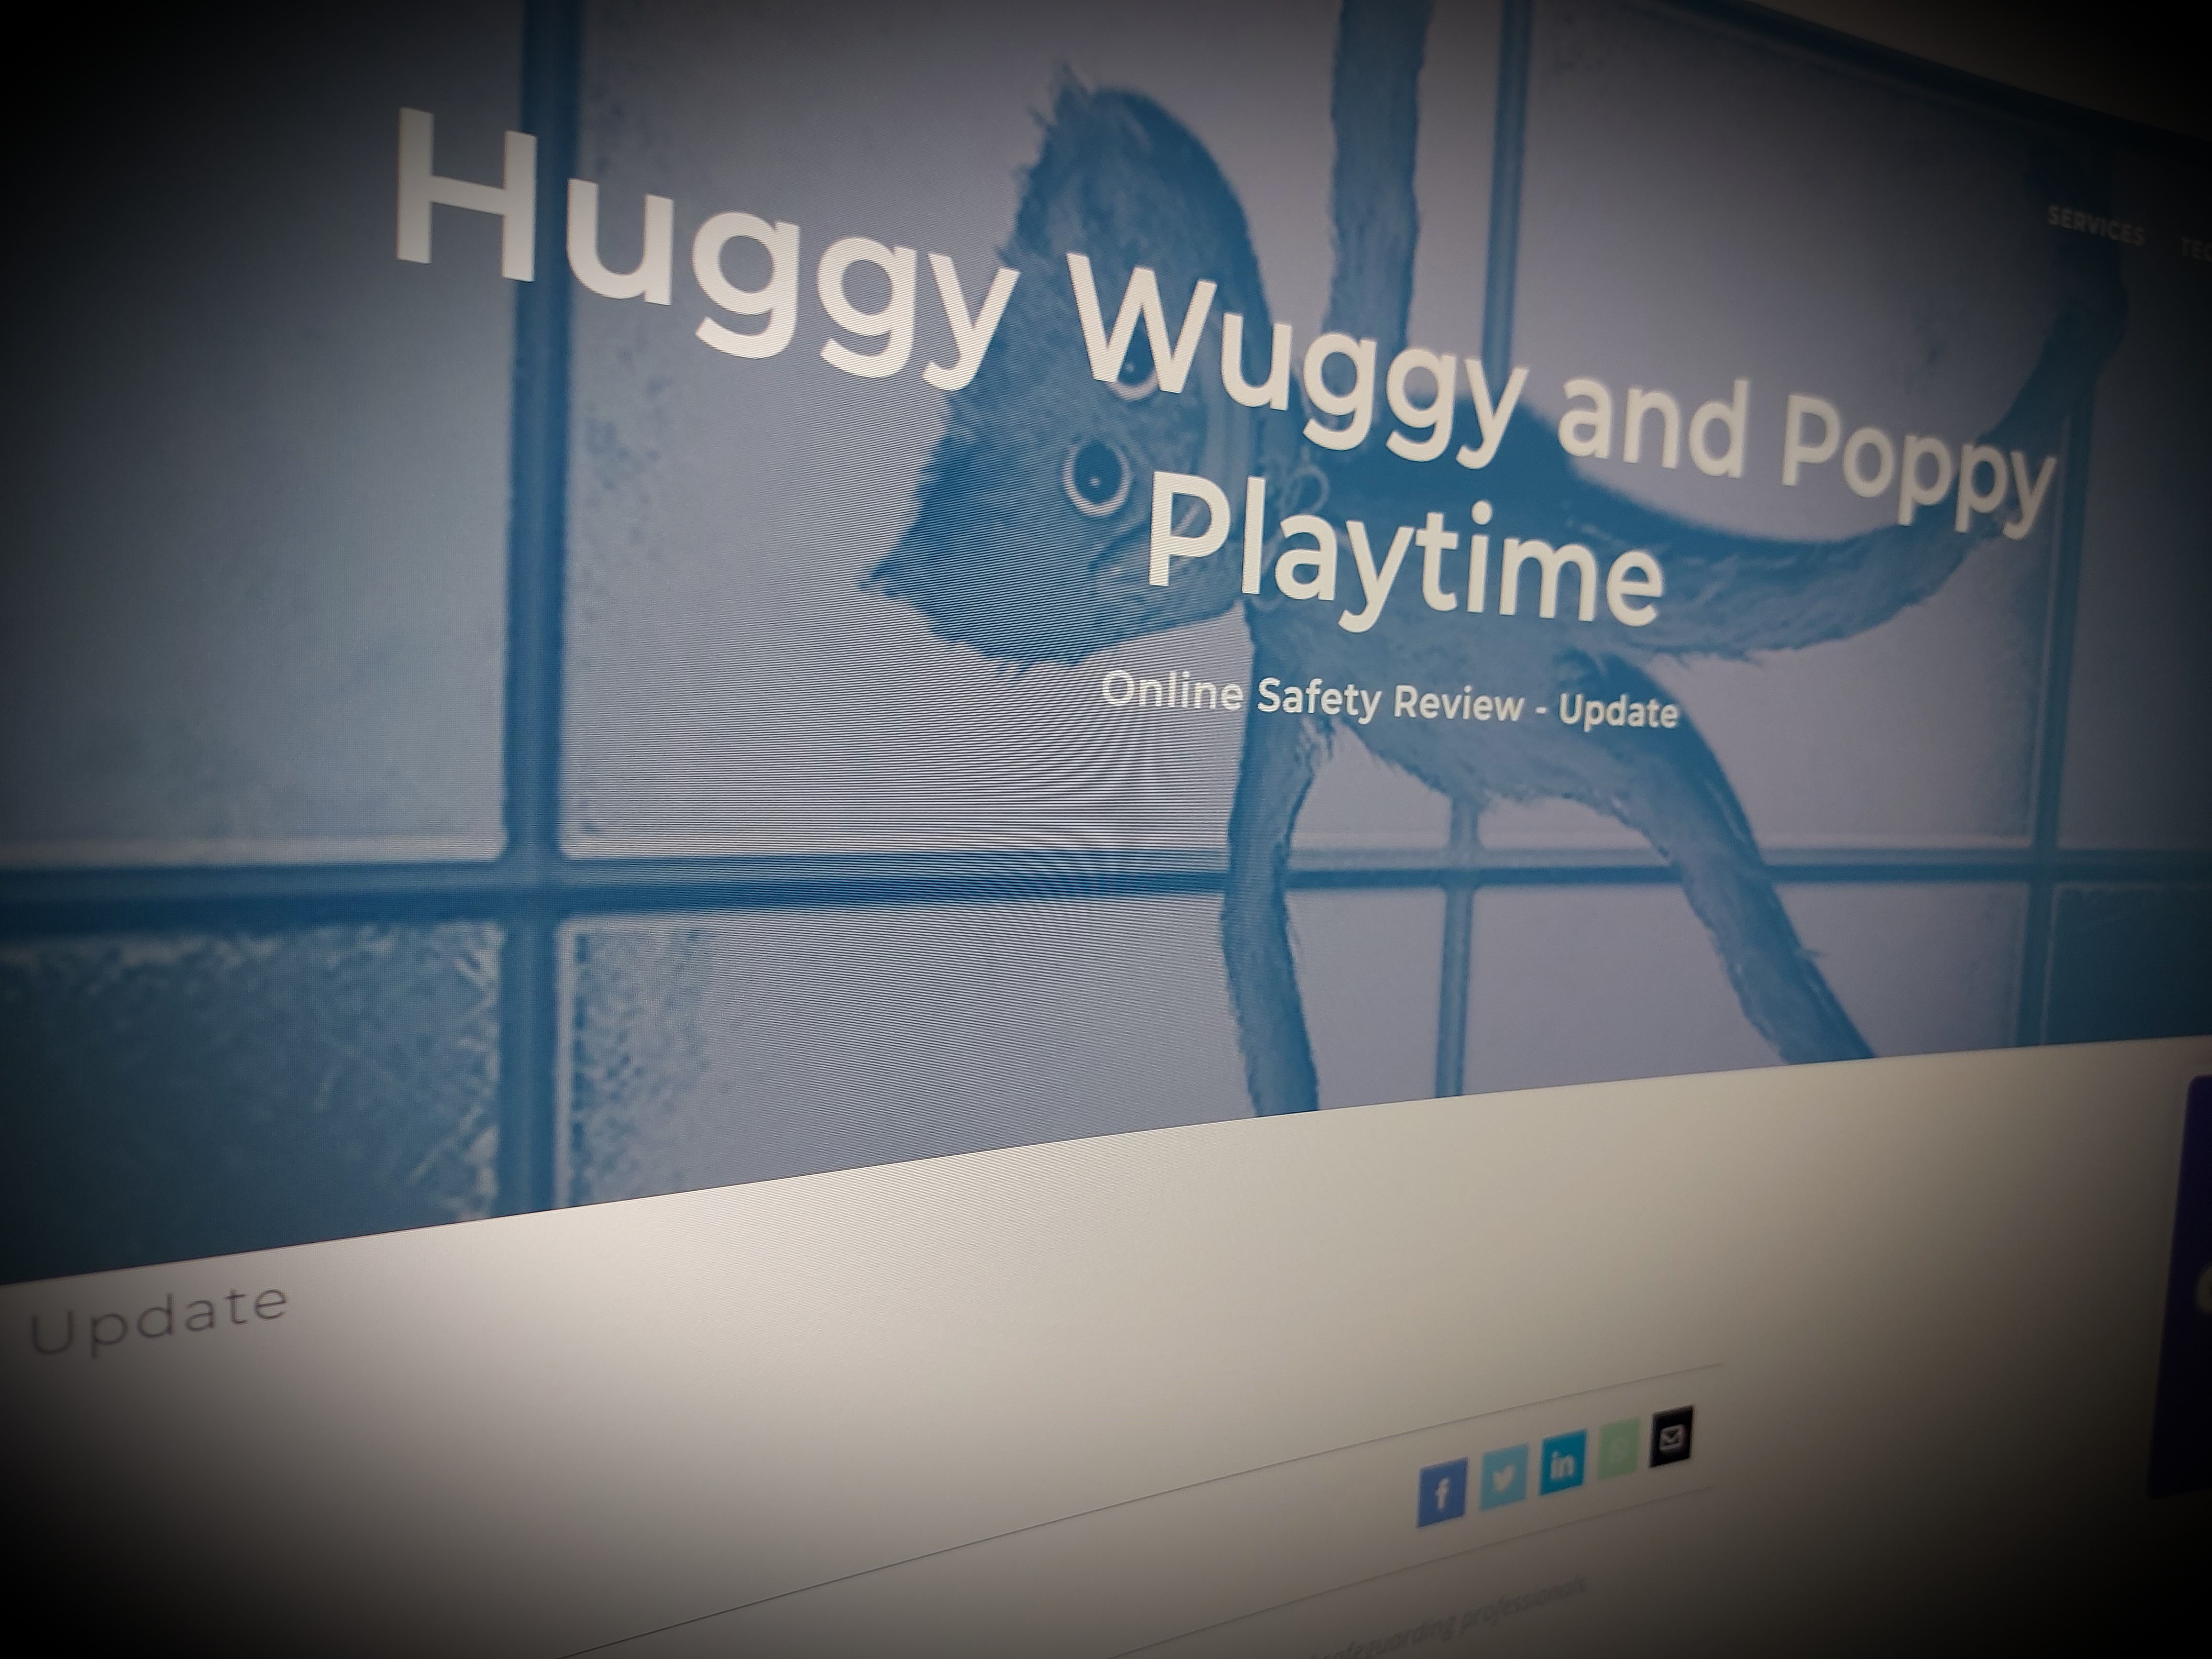 Huggy Wuggy and Poppy Playtime Online Safety Review - Simfin